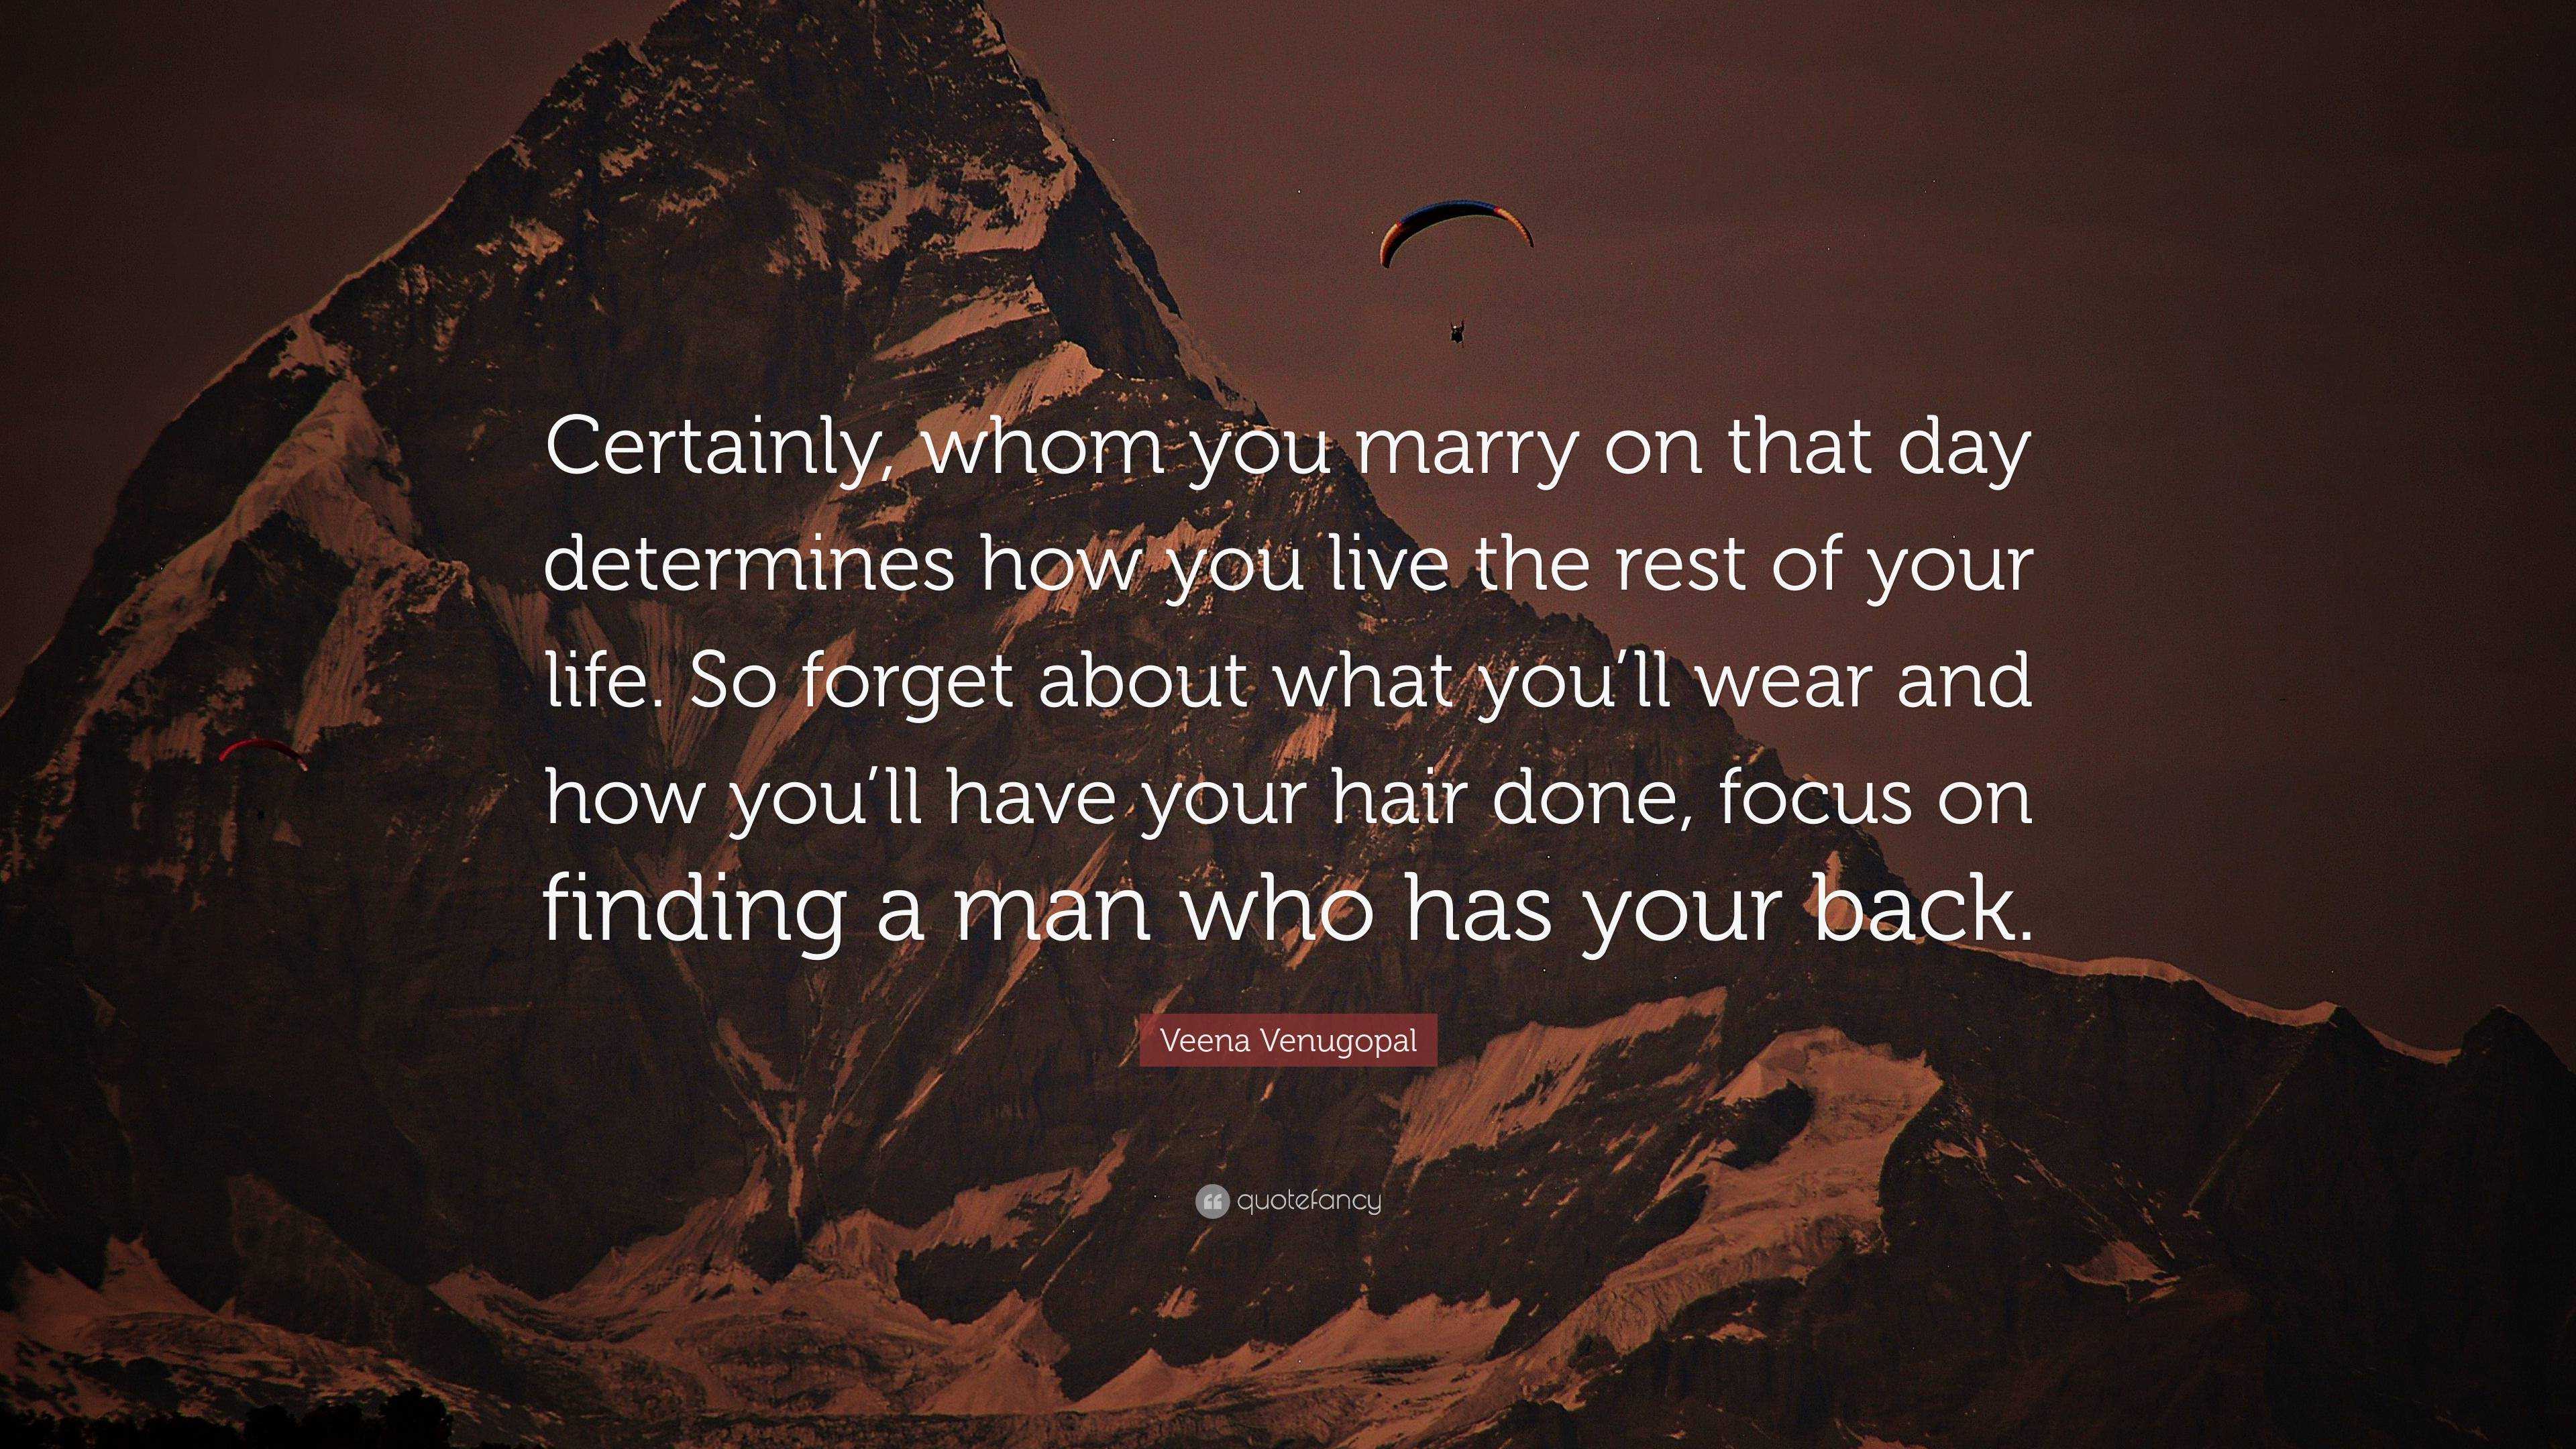 Veena Venugopal Quote “certainly Whom You Marry On That Day Determines How You Live The Rest